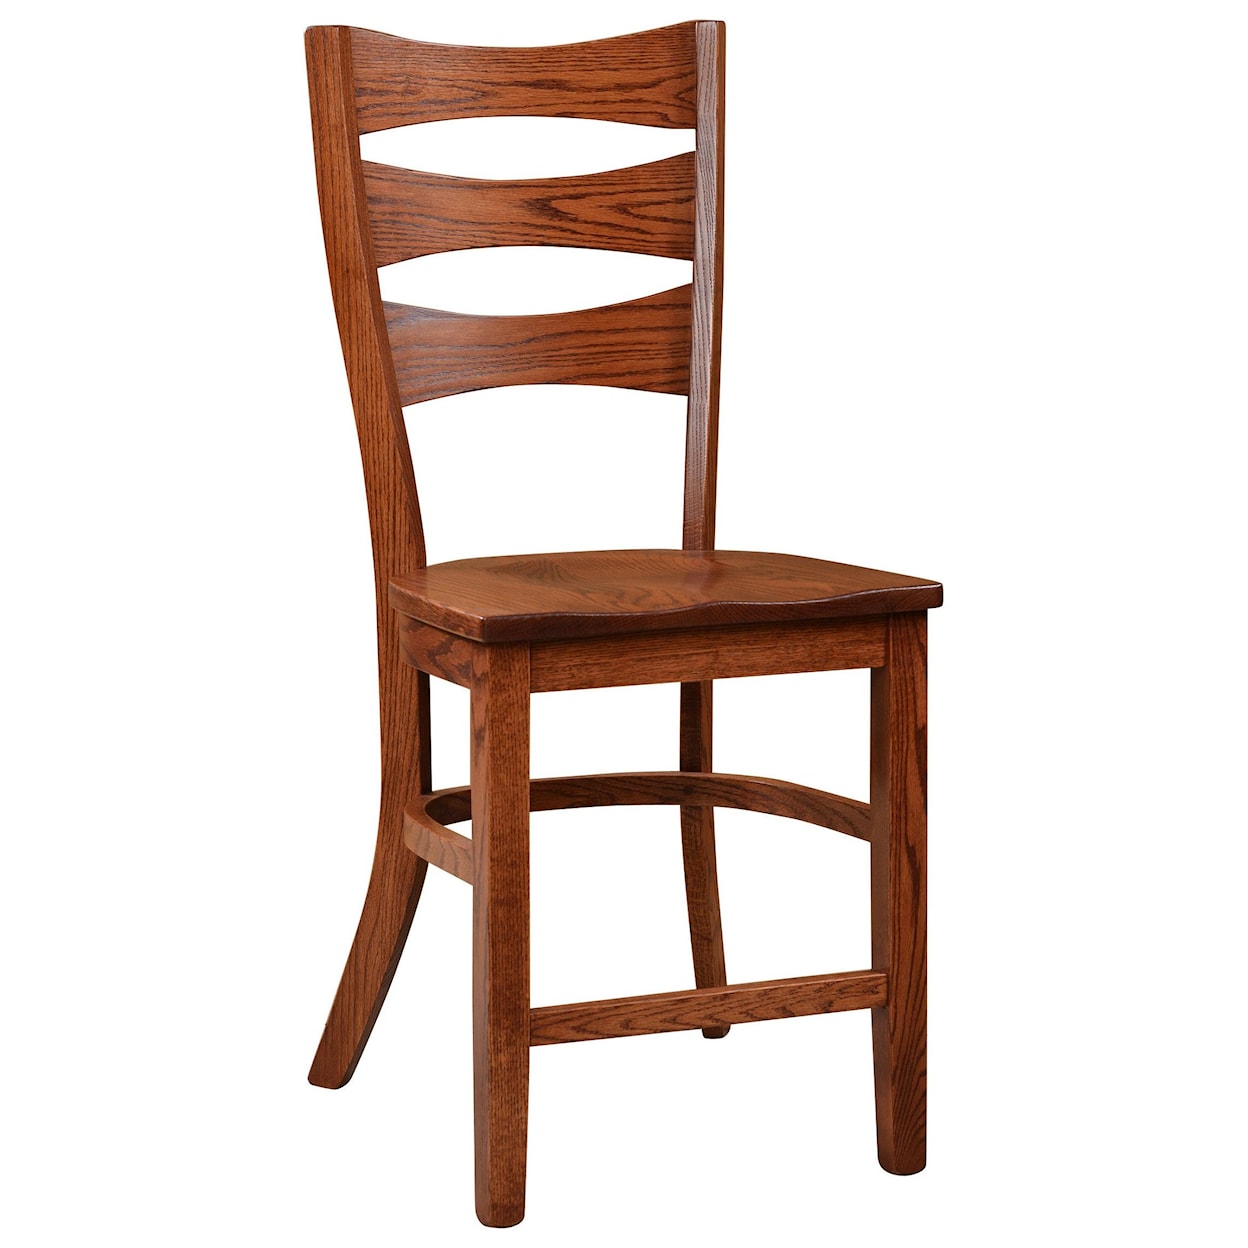 Wengerd Wood Products Sierra 24" Stationary Stool